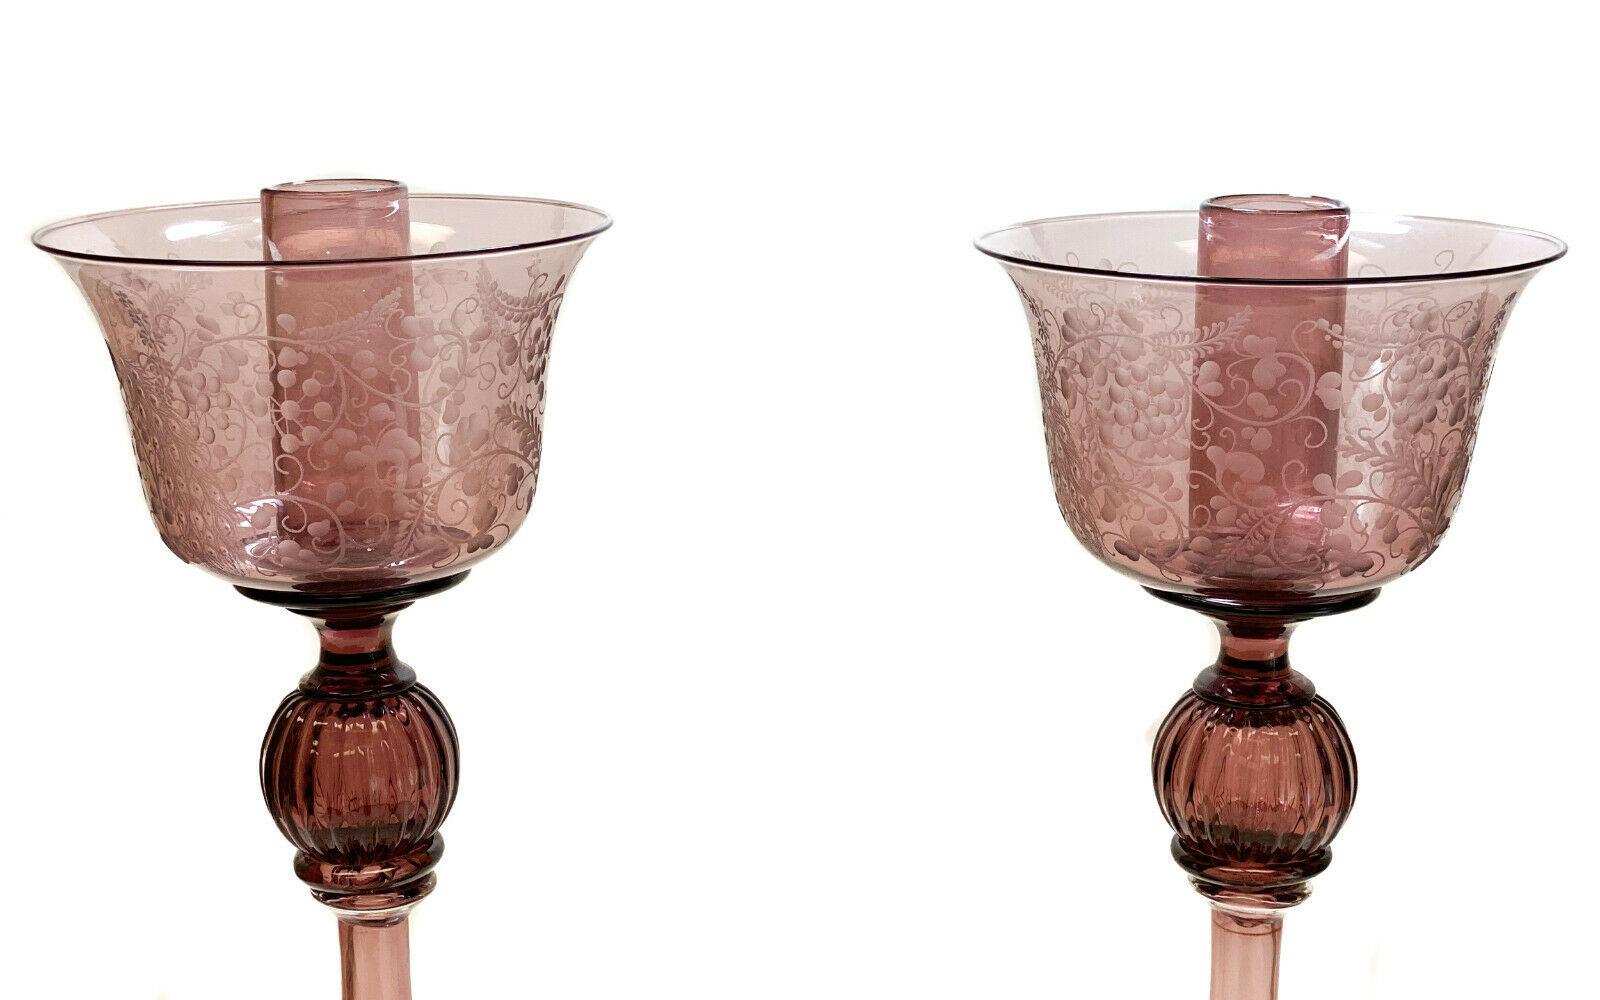 Pair of Venetian Amethyst Glass Engraved floral tall candlesticks, Mid Century

Engraved flowers, leaves, and vines to the exterior.

Additional Information:
Type: Candlesticks 
Brand: Ventian
Material: Glass
Dimension: 6.75 inches diameter